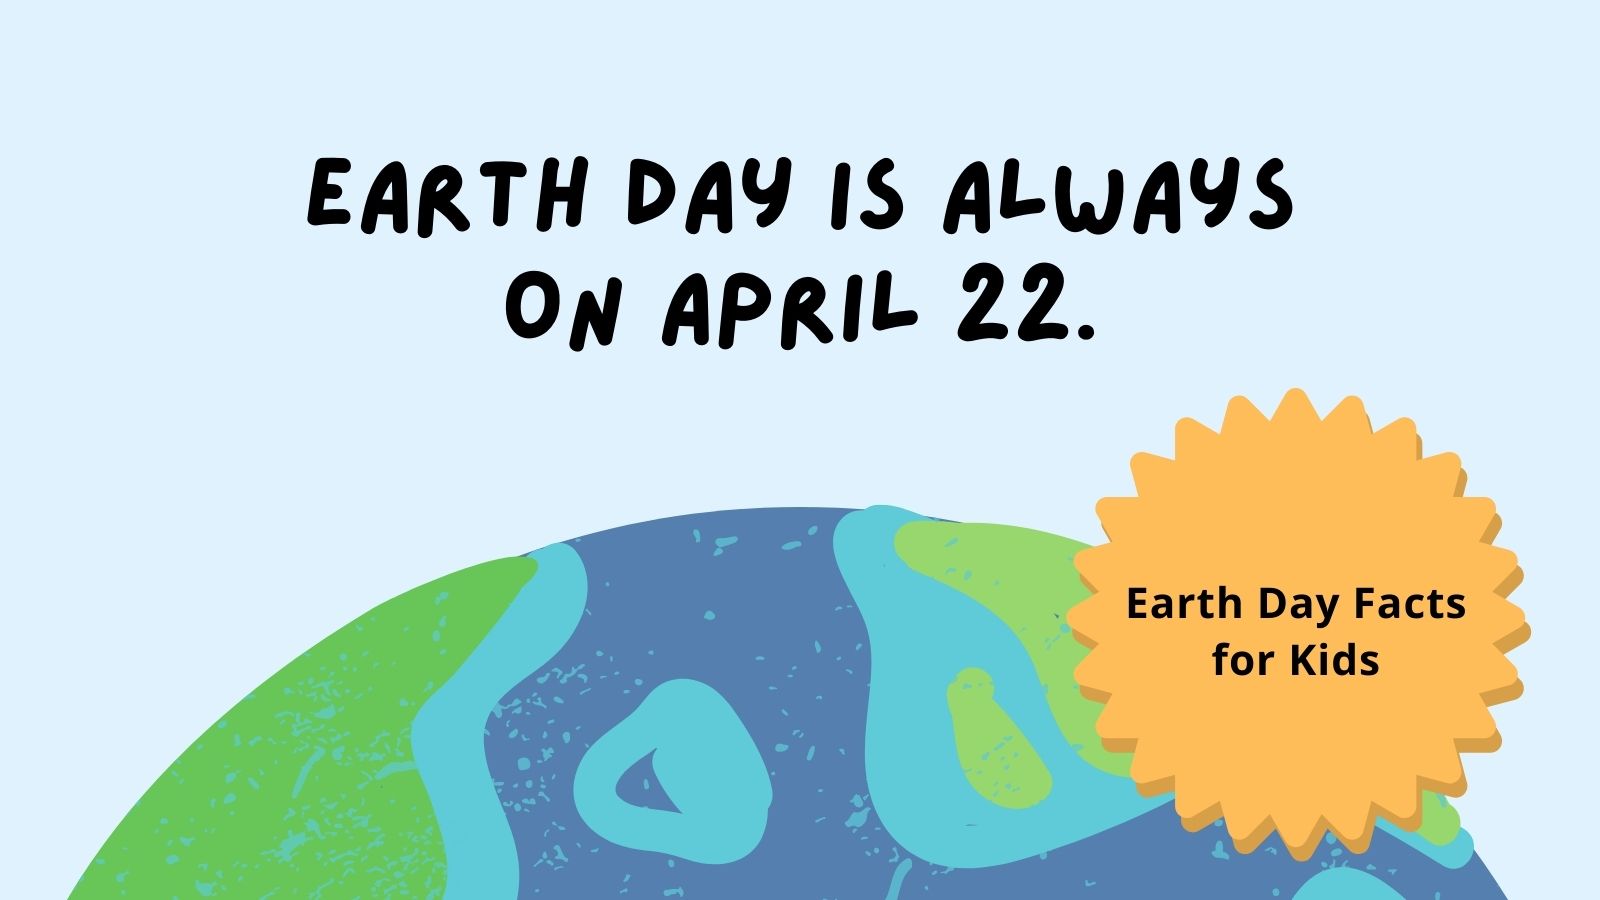 Earth Day is always on April 22.